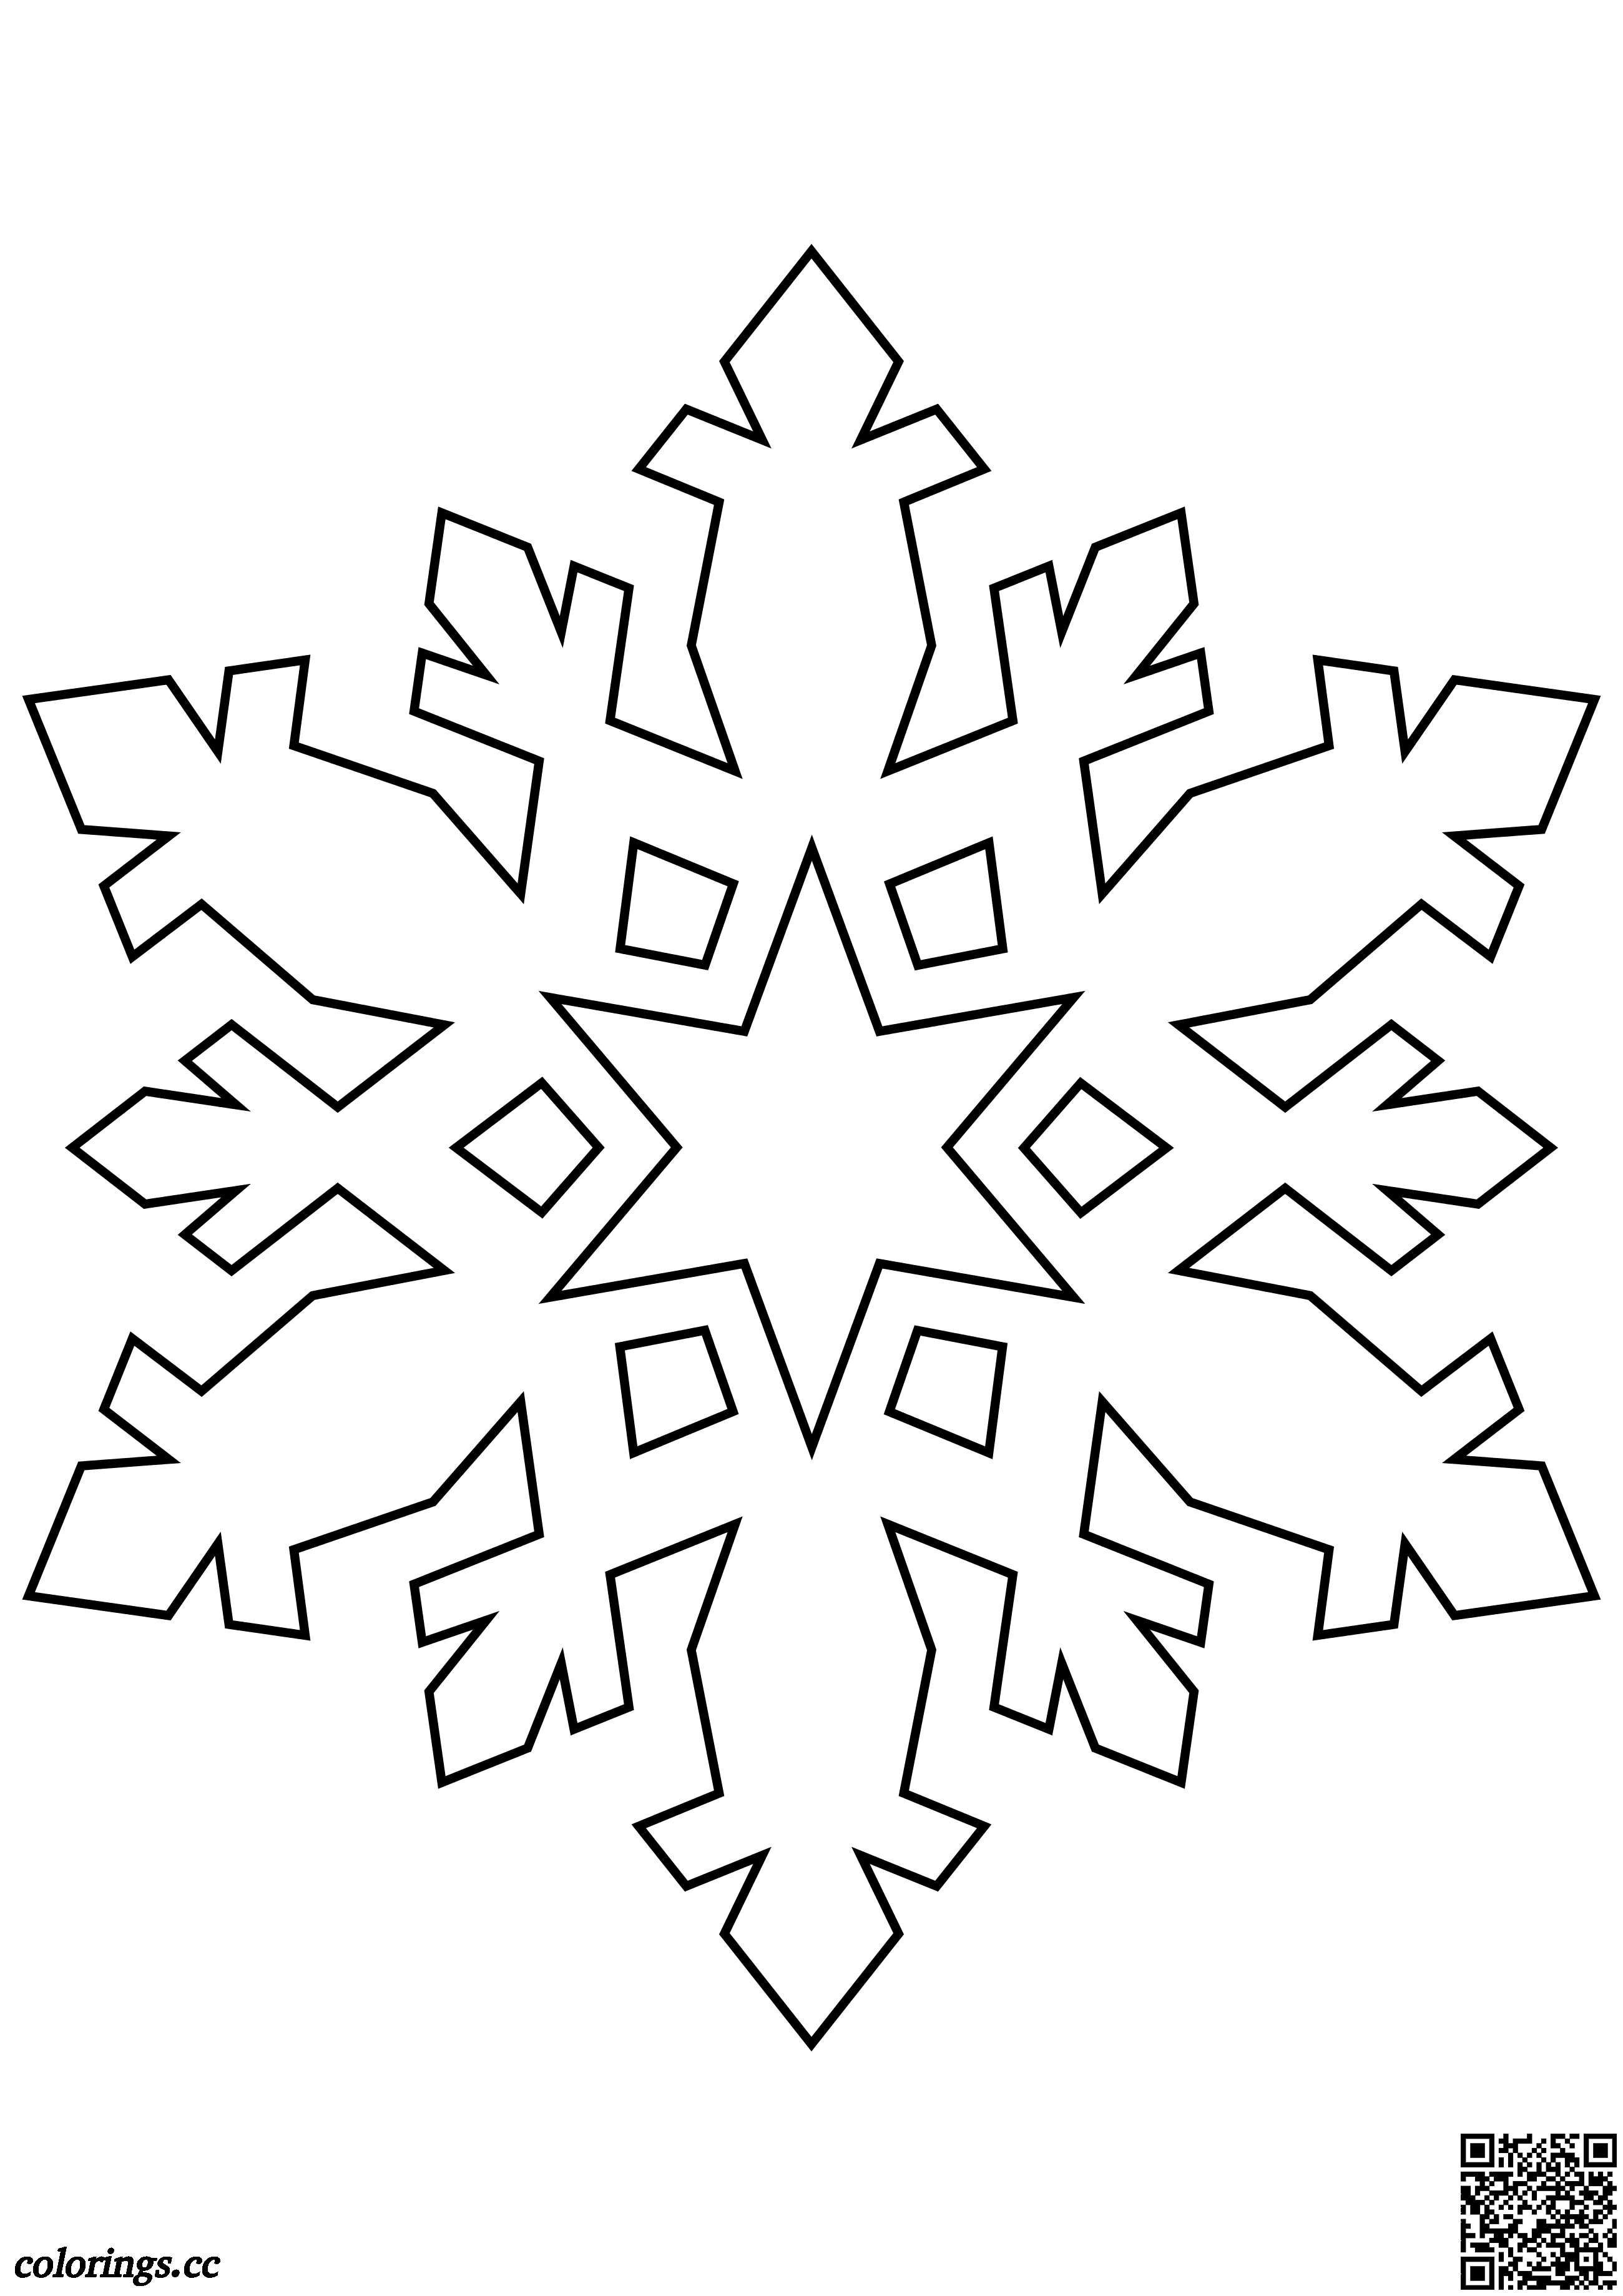 Snowflake 28 coloring pages, Snowflakes coloring pages - Colorings.cc